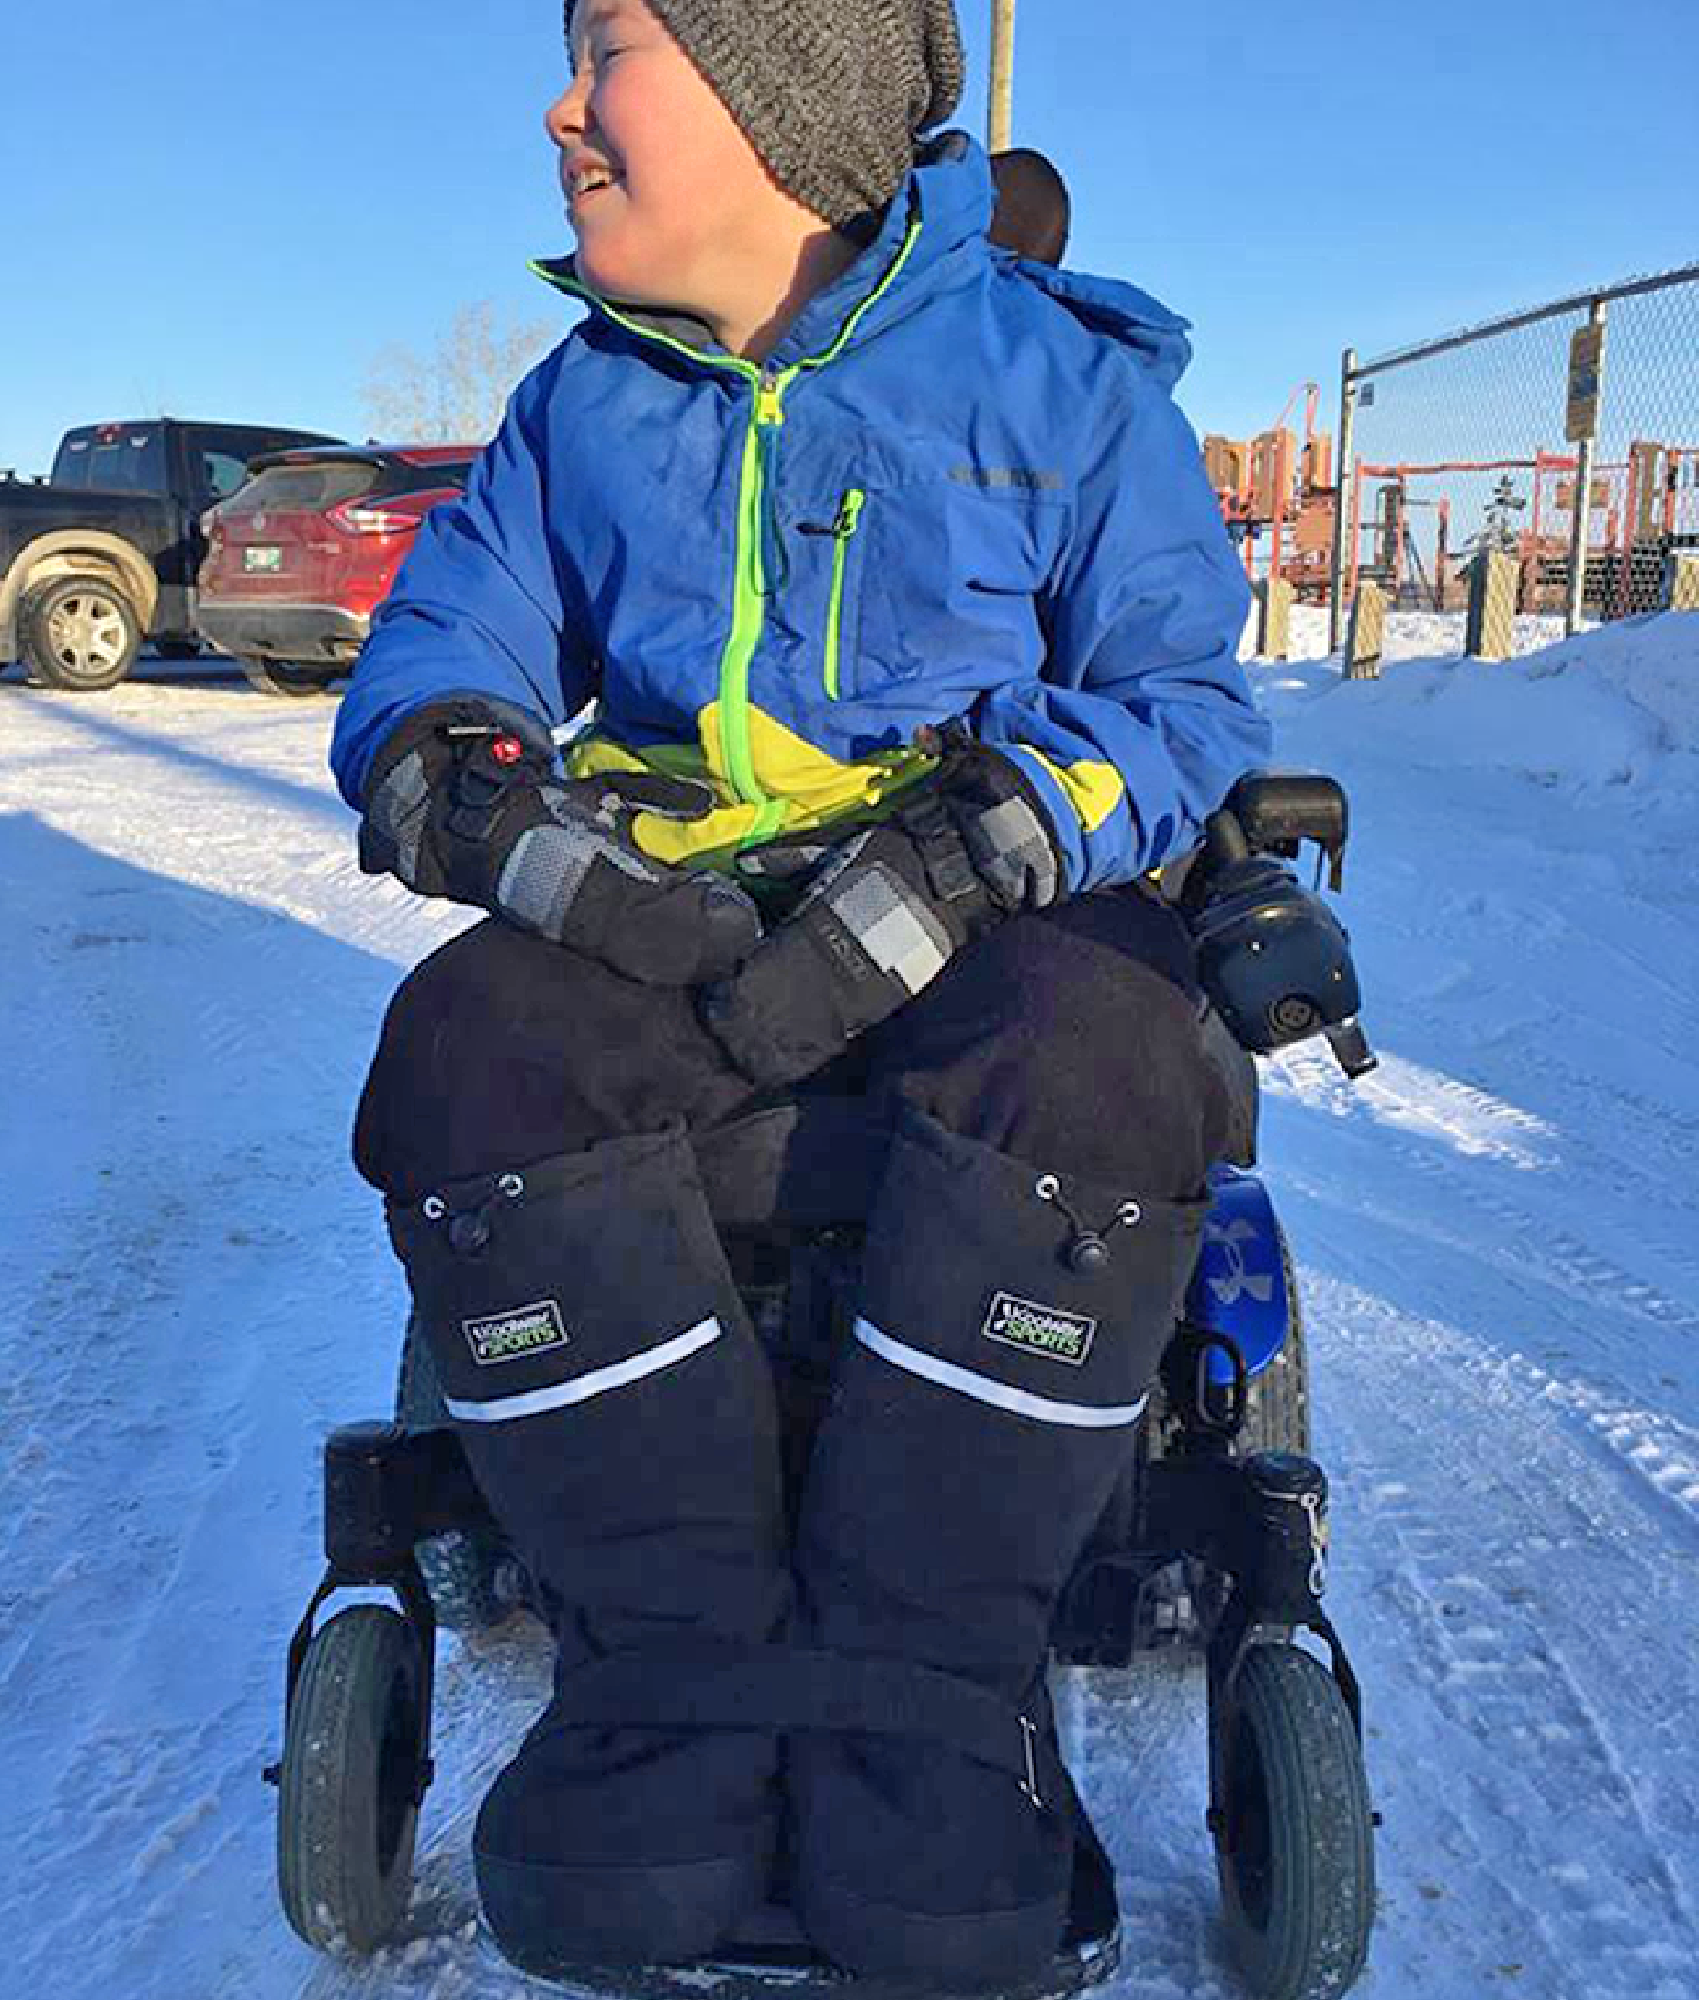 Adaptable Winter Wear — Cerebral Palsy Kids and Families